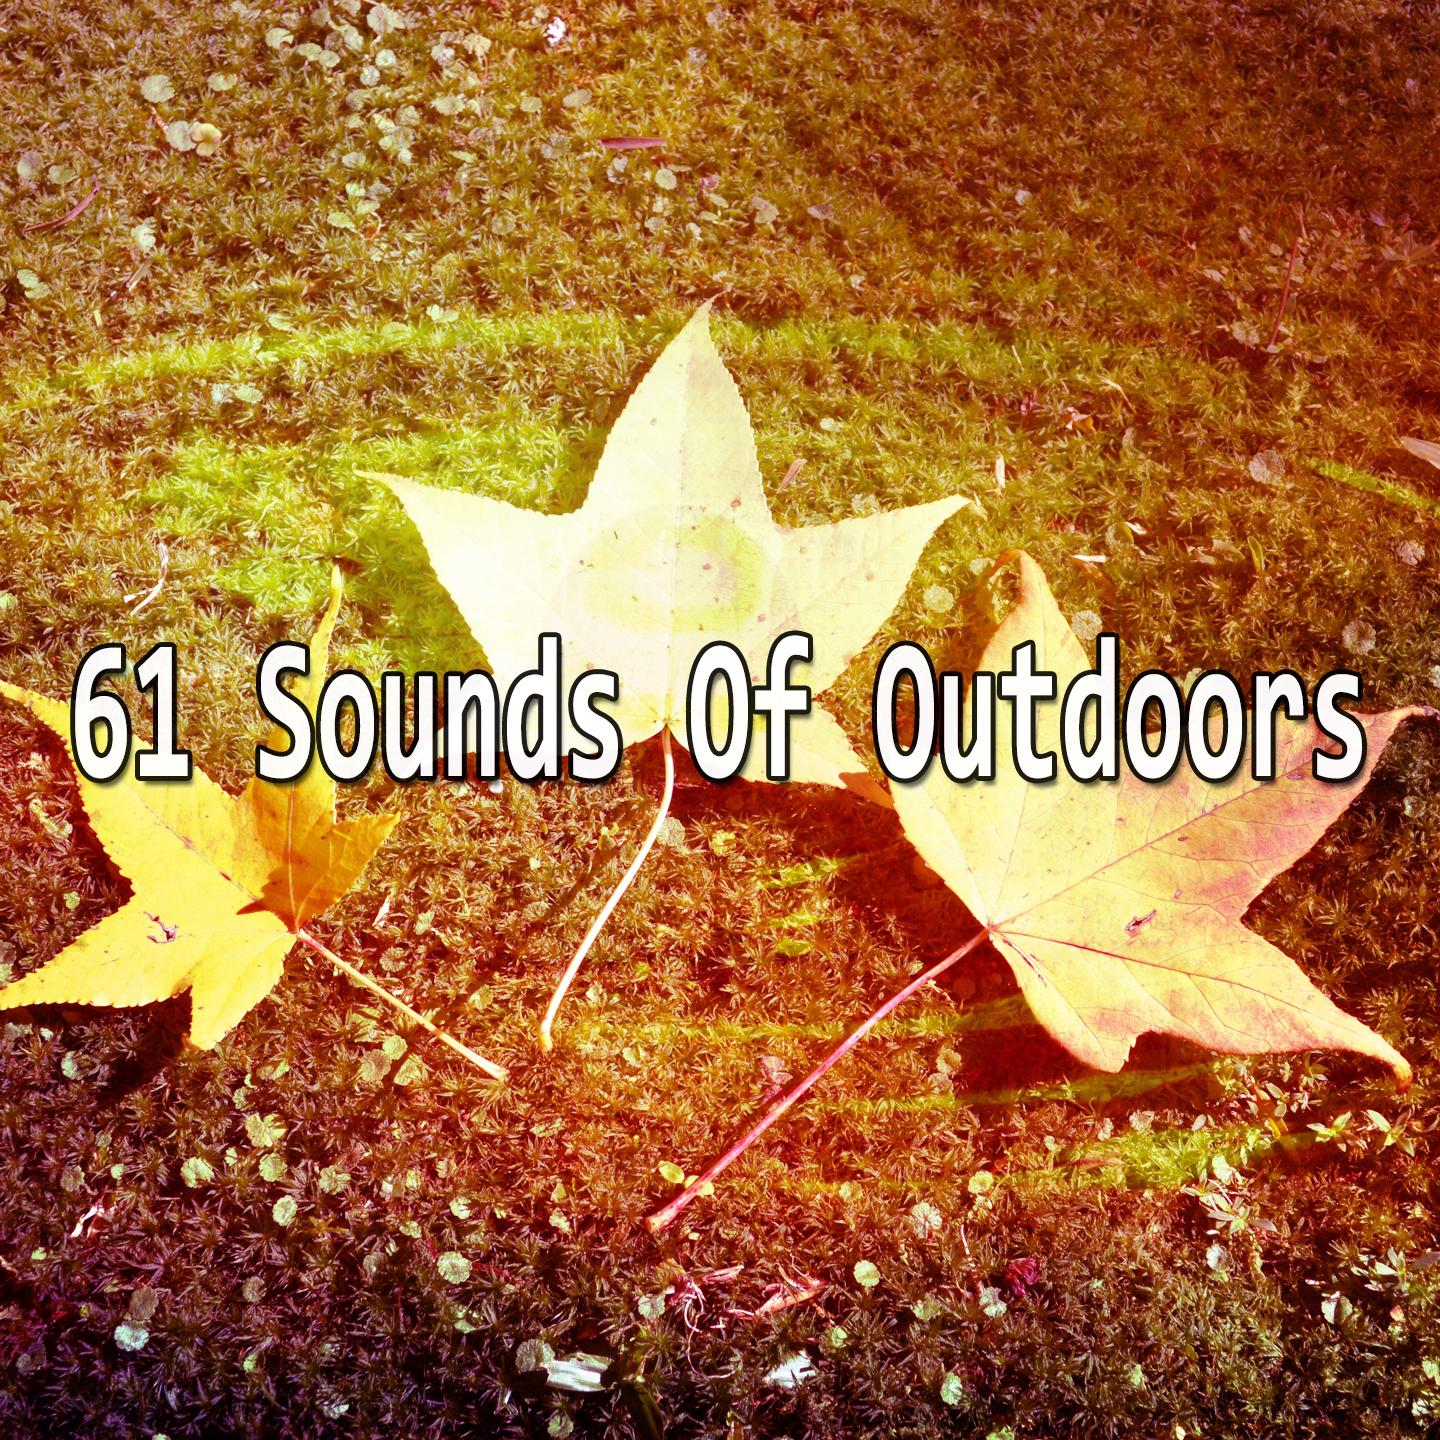 61 Sounds of Outdoors